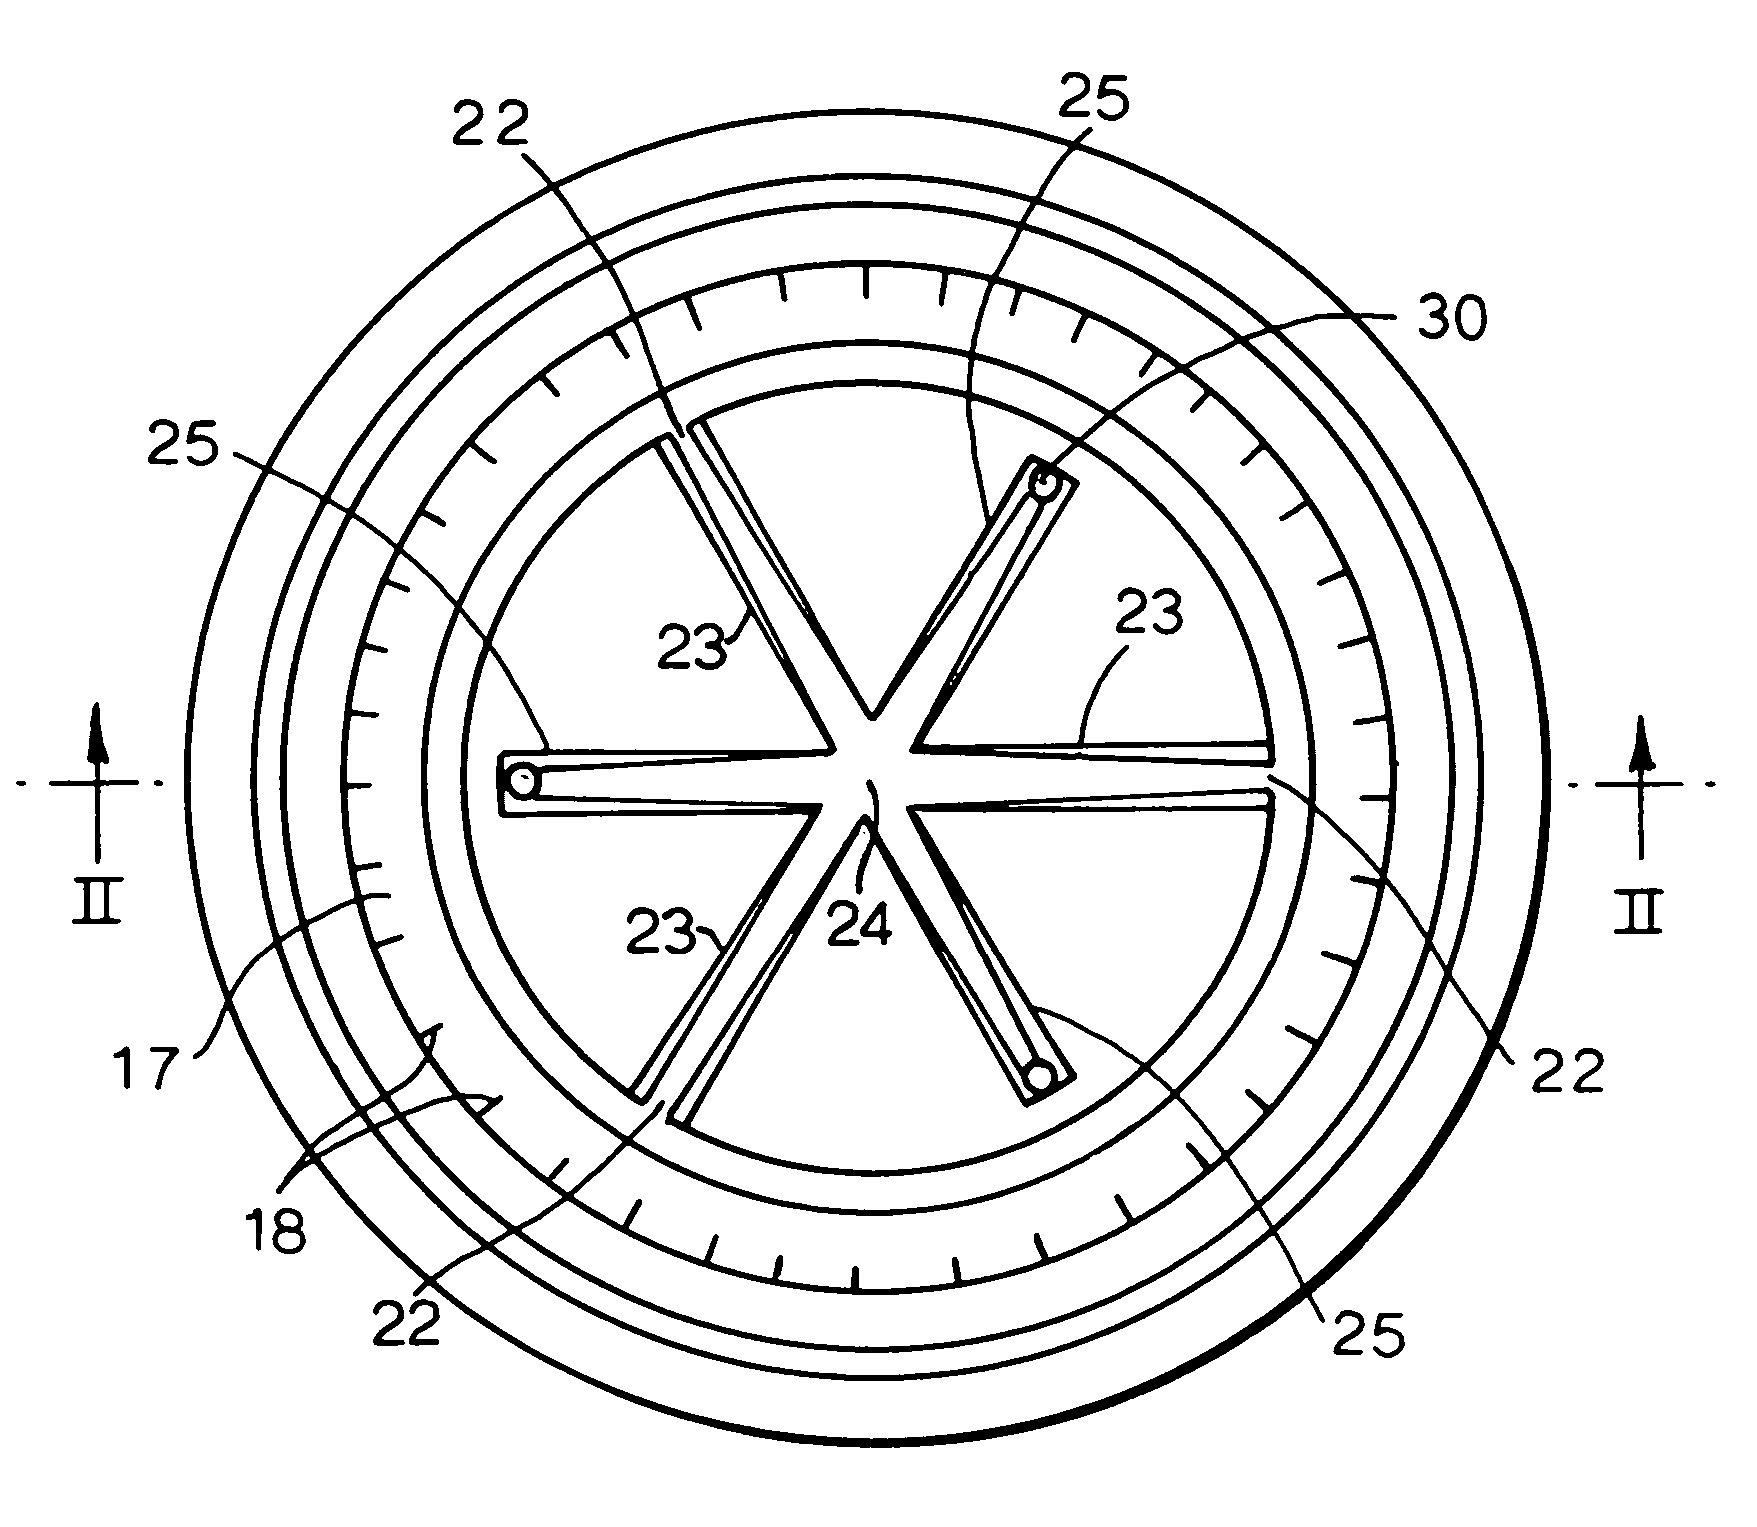 Cosmetic dispenser housing and method